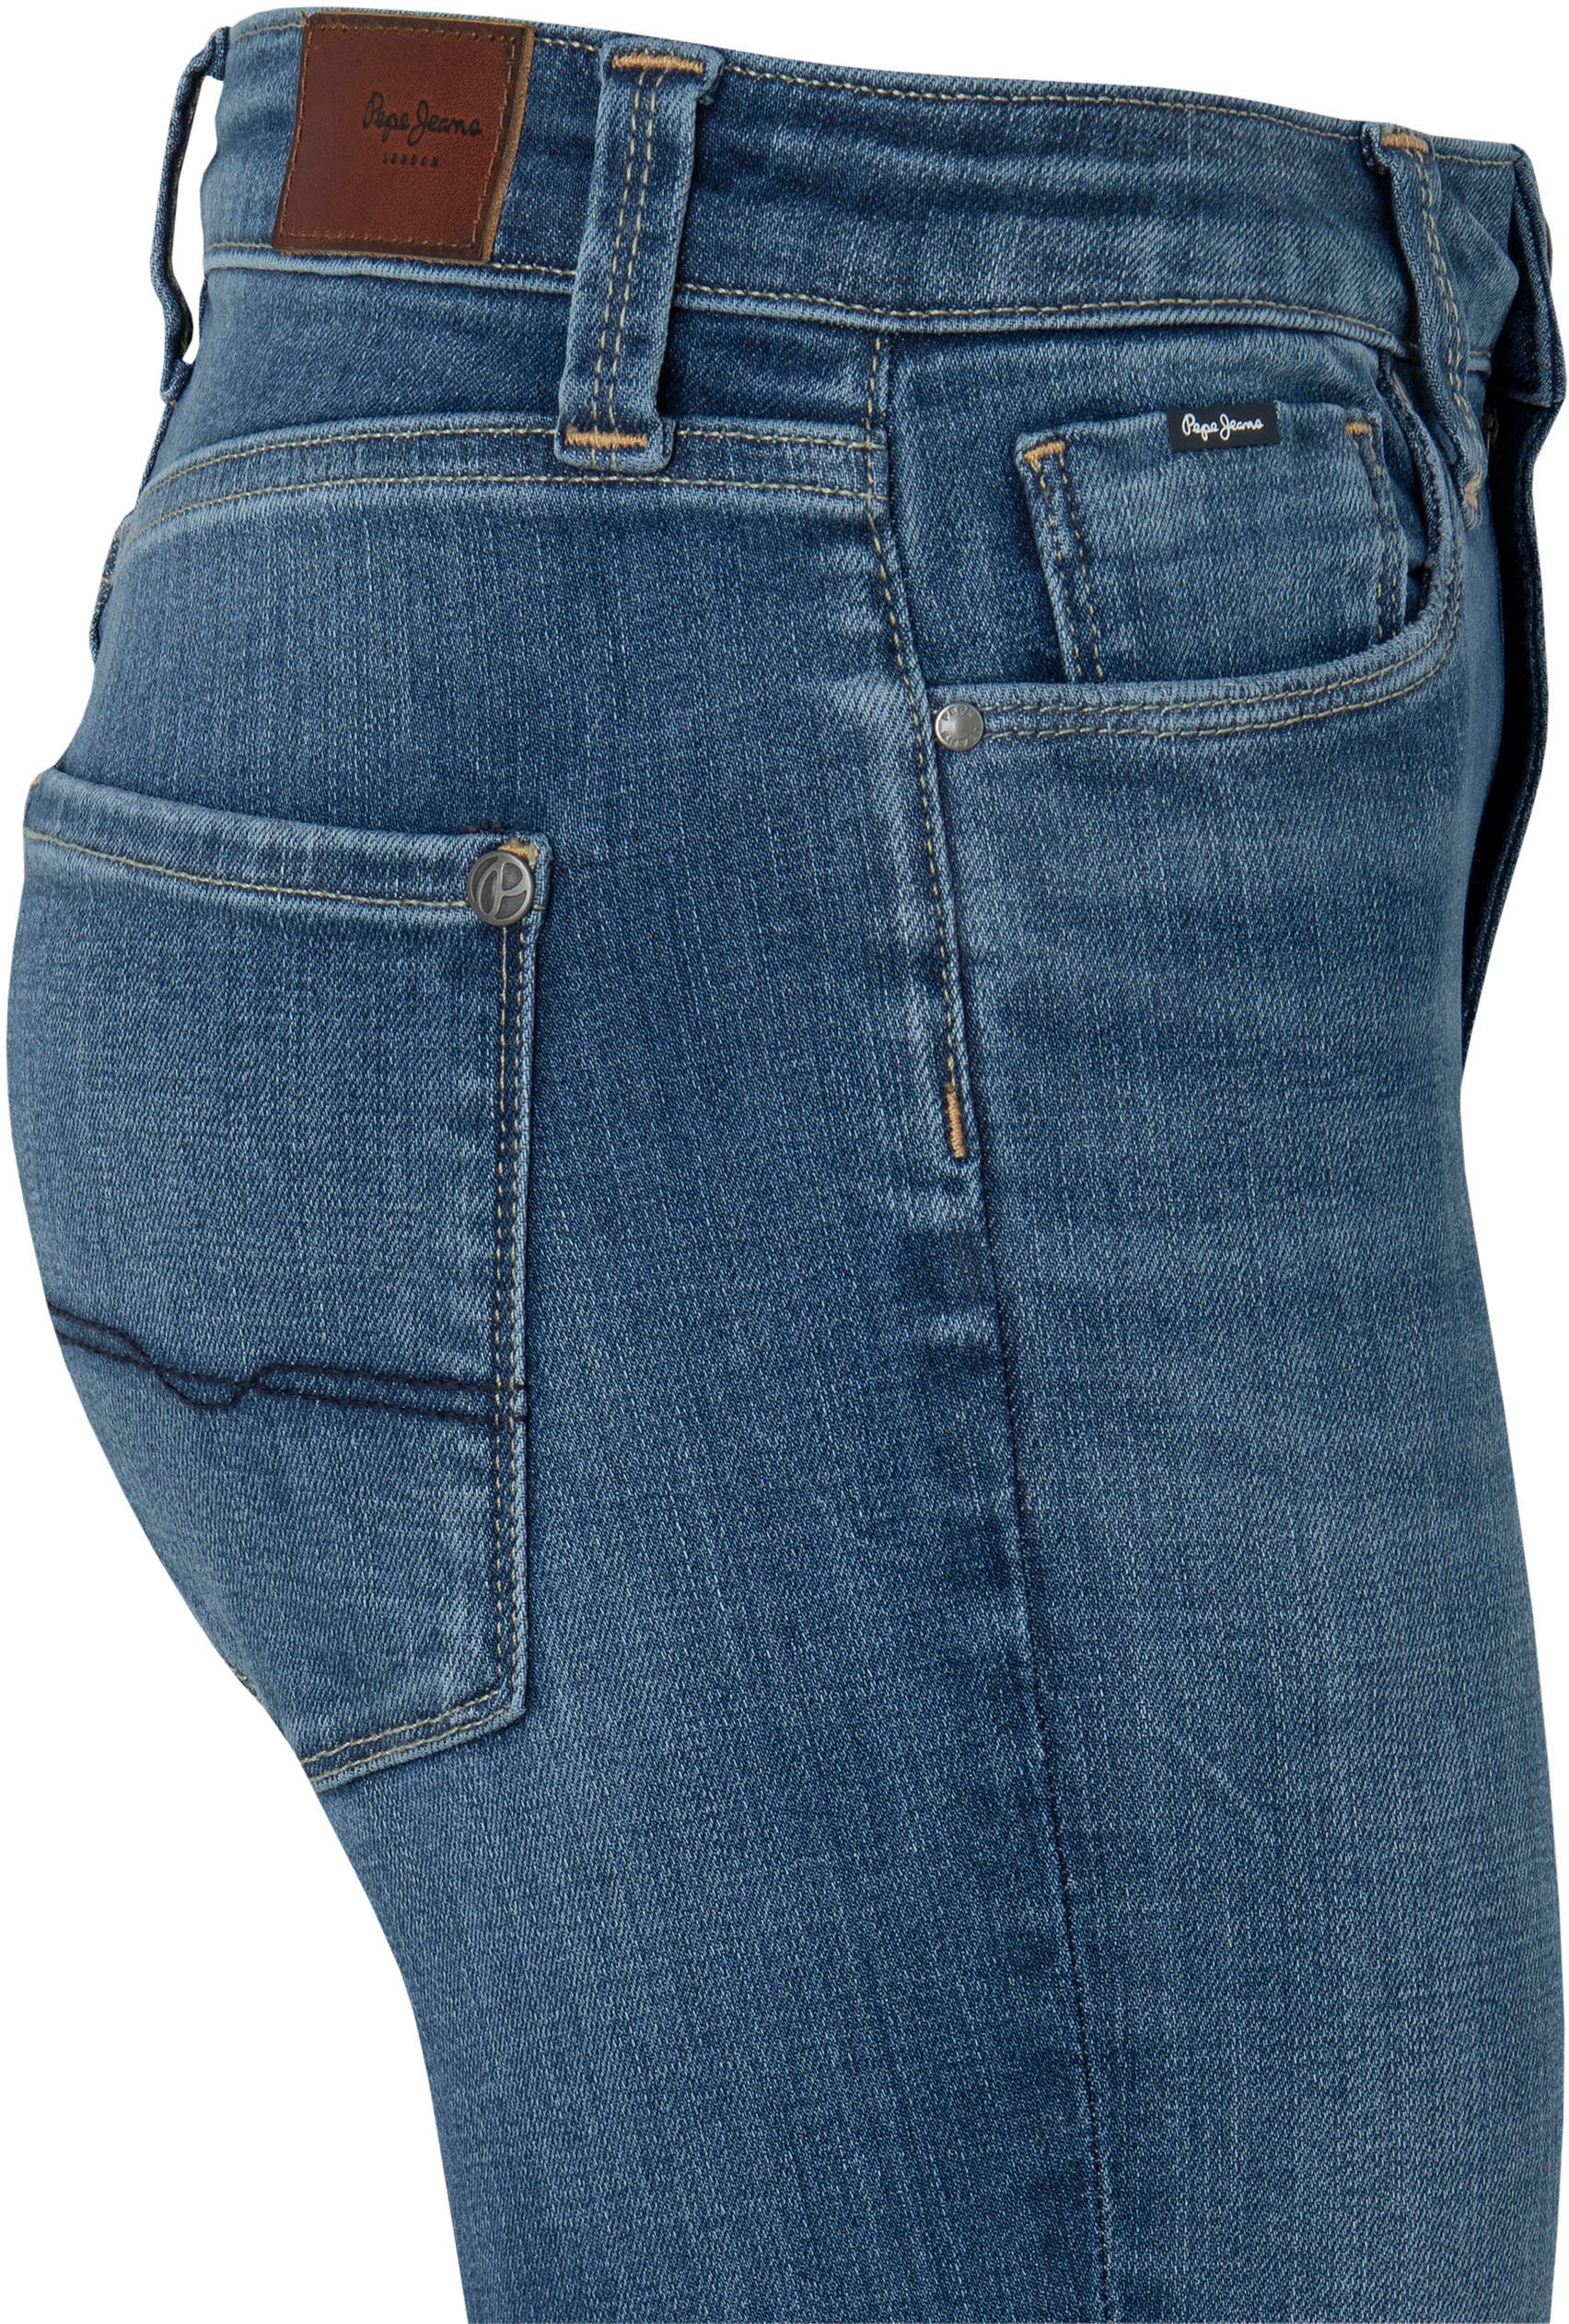 Pepe Jeans Bootcut-Jeans »Dion Flare« kaufen online